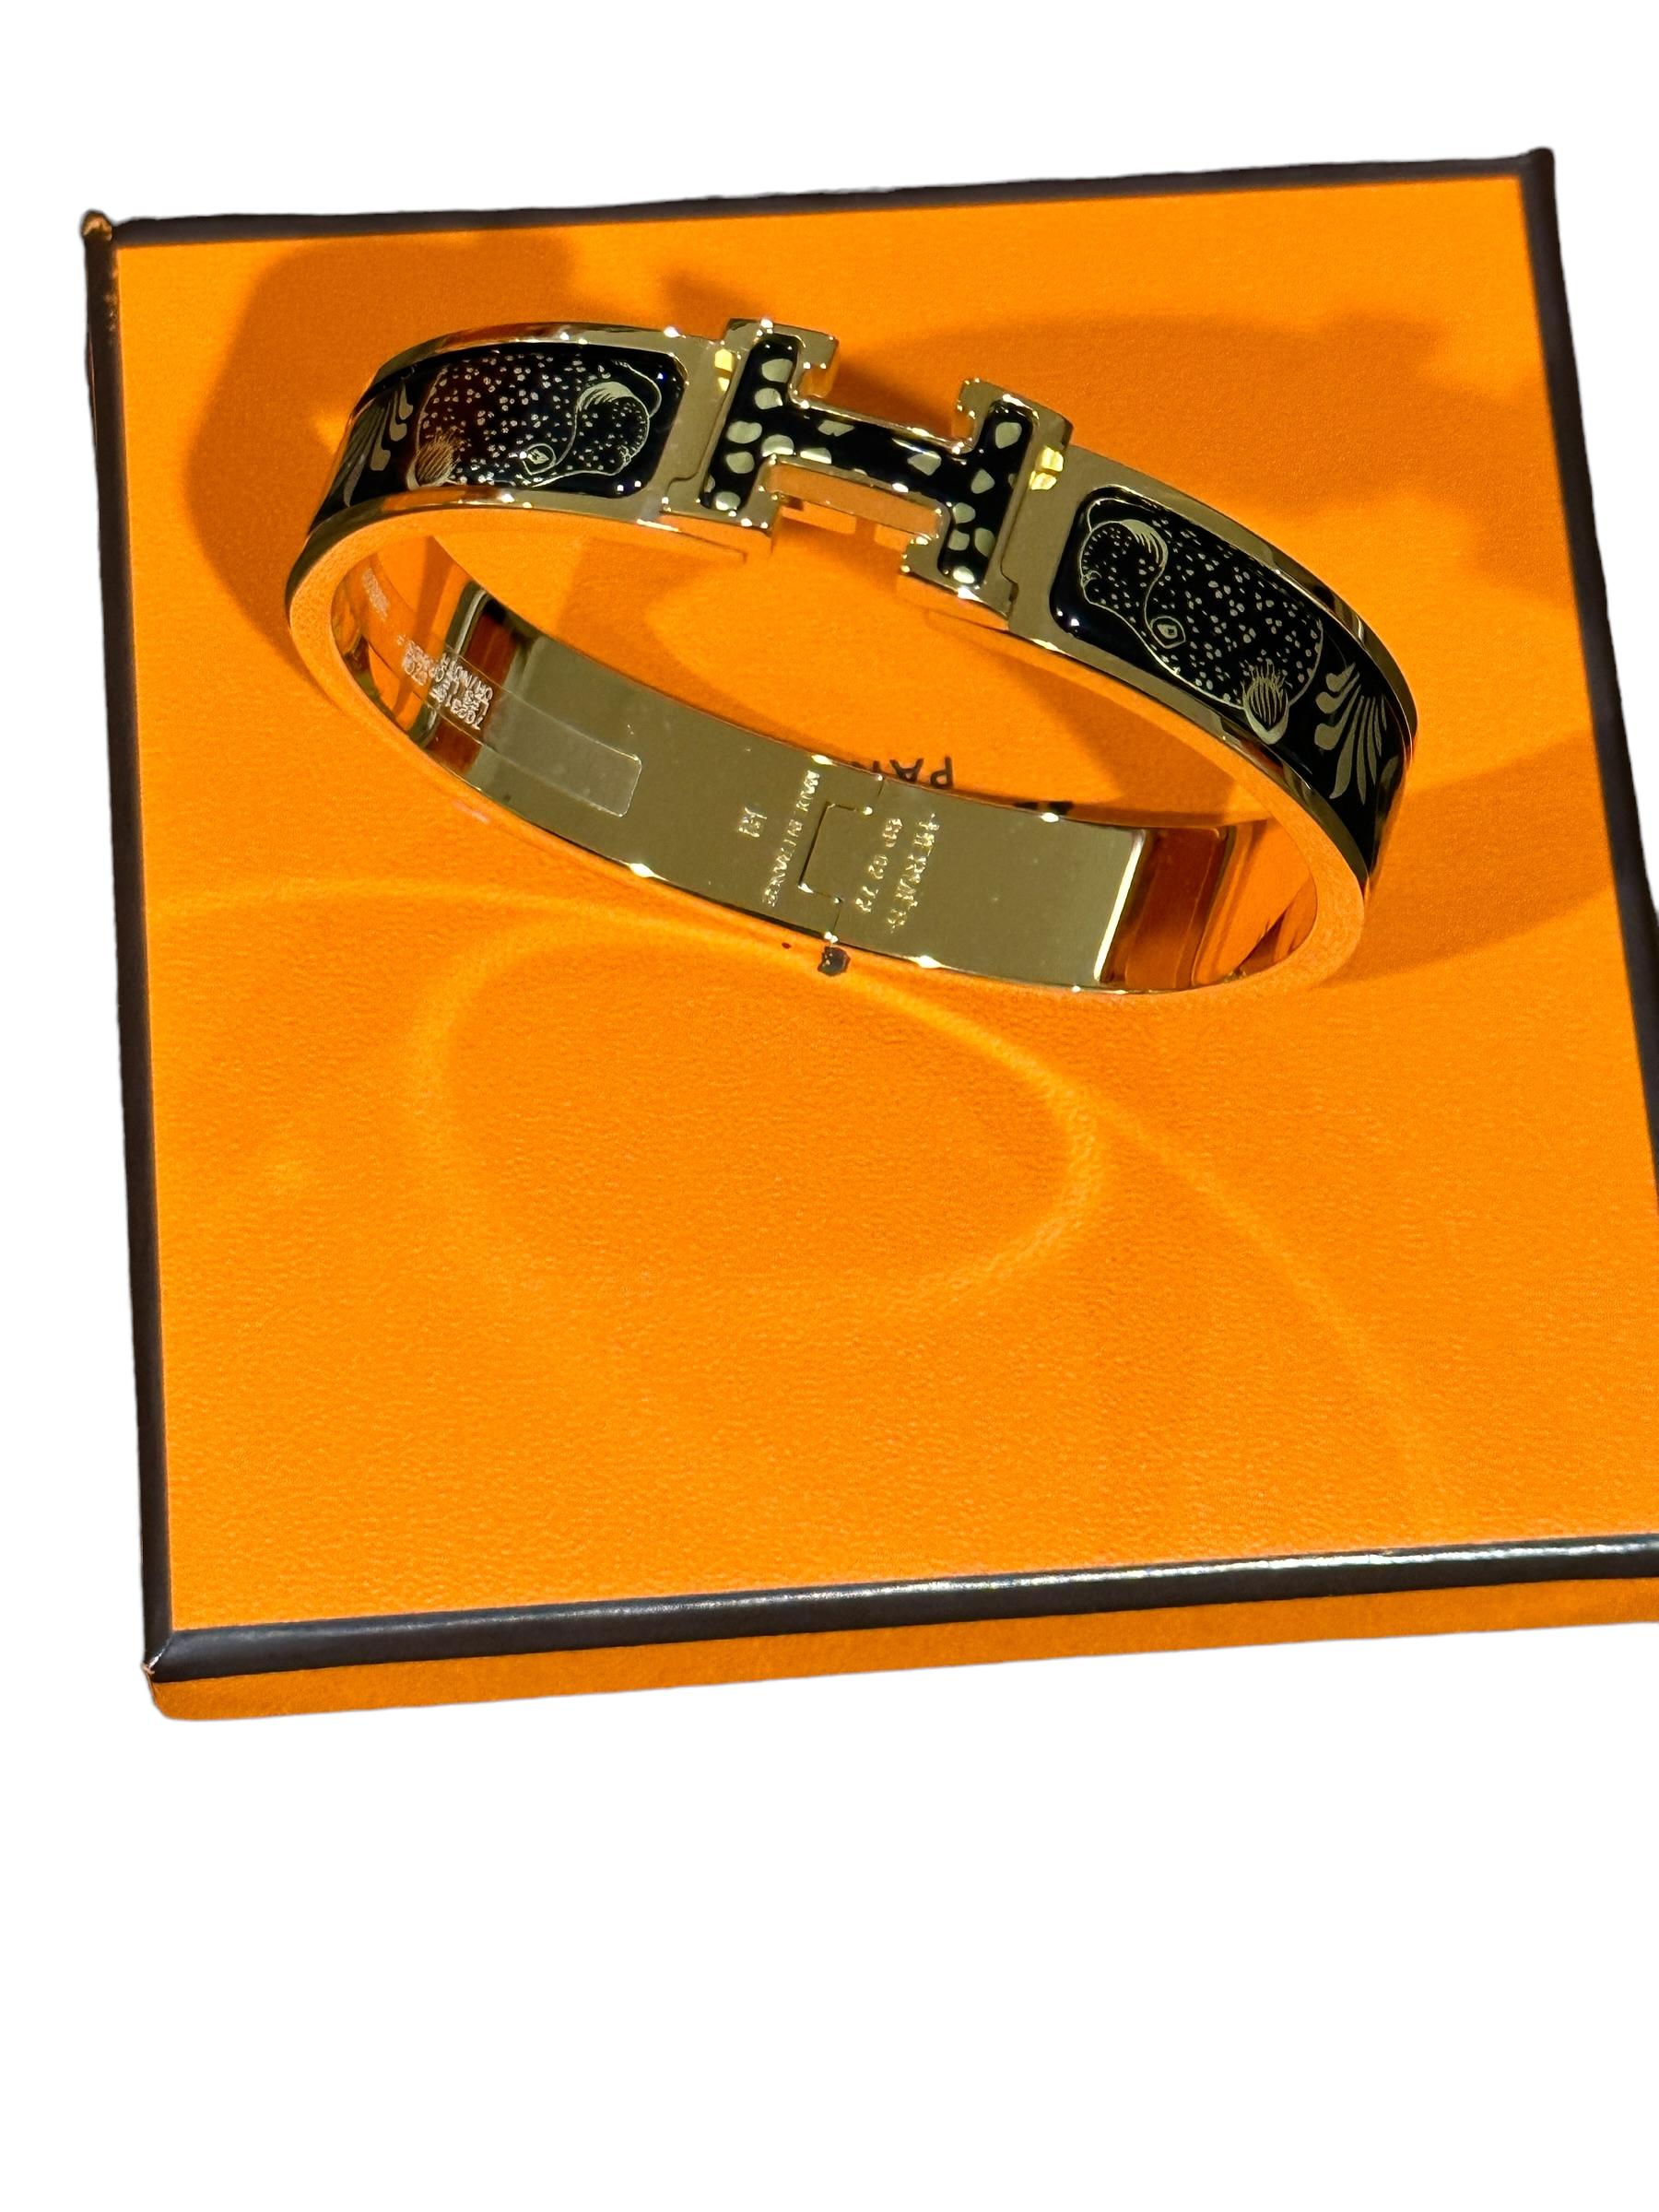 Hermes Printed Enamel Bracelet
Plastic on Hardware from store
Les Leopards
Black and Gold is there anything better?
Enamel
Yellow Gold Plated 
Size PM
Circumference: 7